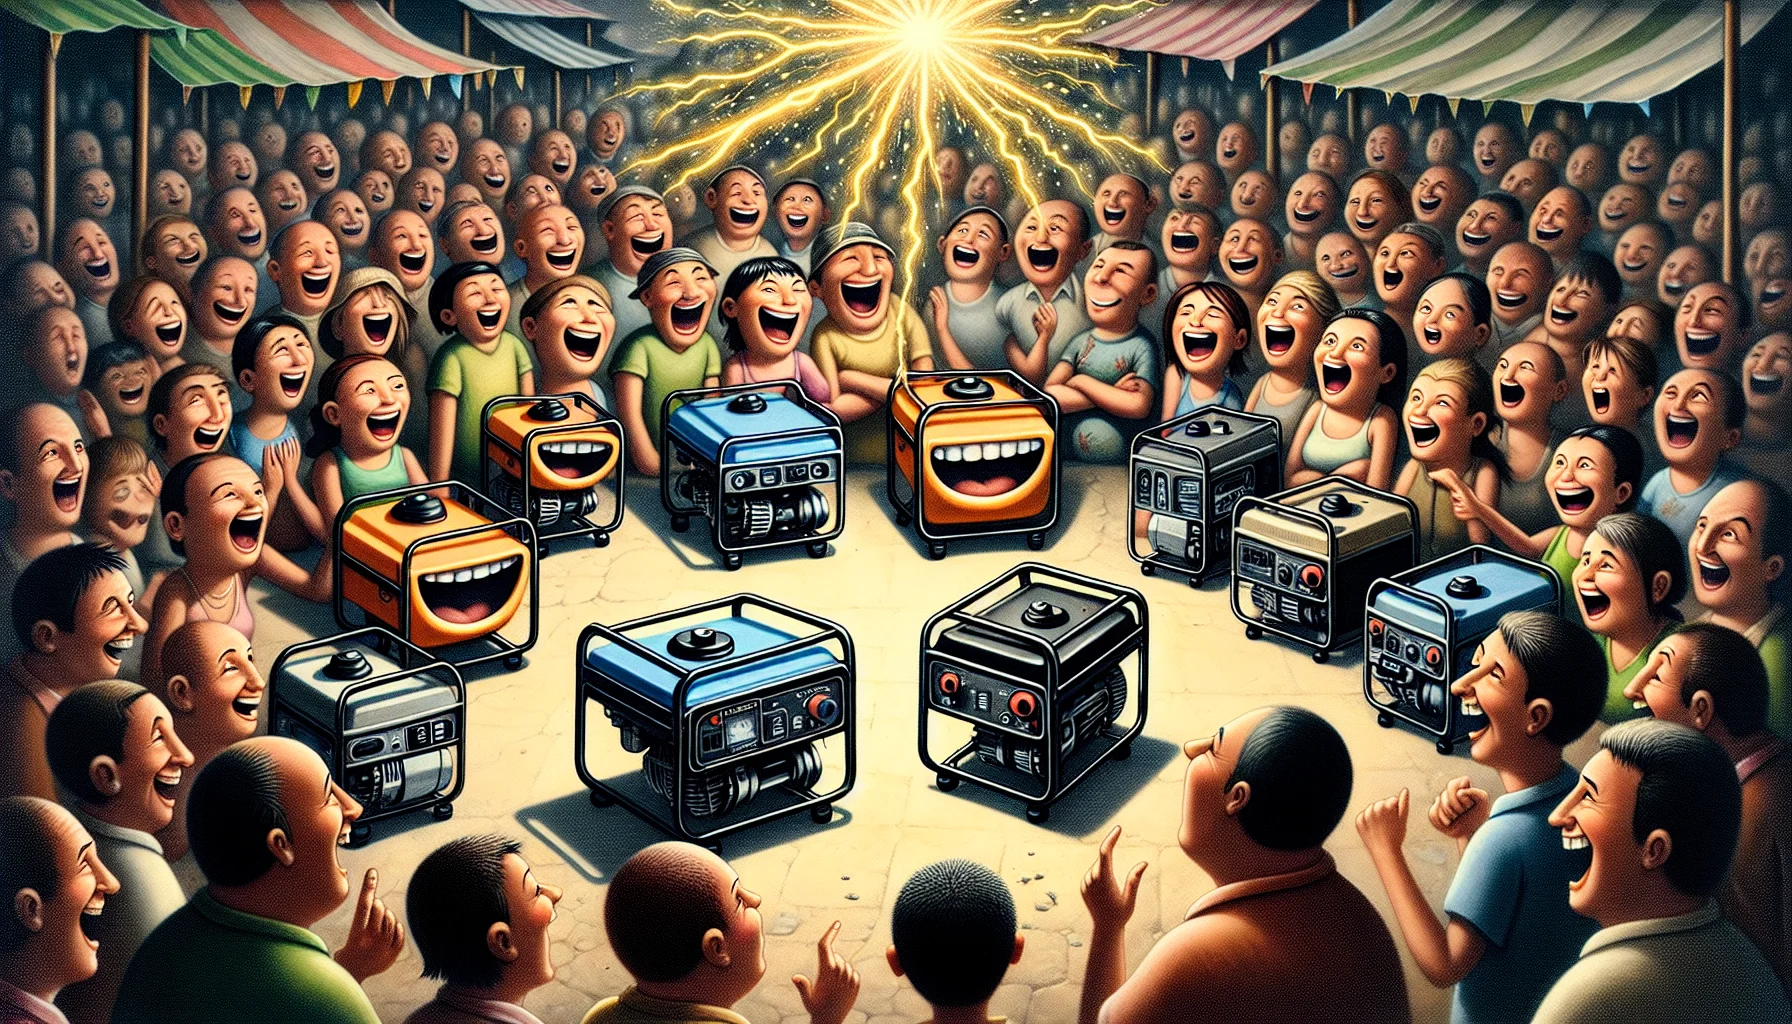 Imagine a delightful and amusing marketplace scene. We see a crowd of people, with a mix of genders and descents such as Caucasian, Hispanic, Middle-Eastern, and South Asian, all laughing and showing interest in a variety of portable generators on display. Each generator is anthropomorphized with hilarious and exaggerated facial expressions, as if they're competing with each other to persuade the onlookers. Sparks of electricity flash humorously like fireworks, generating bursts of brightness in the scene, signifying the power these devices possess. This whimsical depiction is designed to evoke a sense of fun in the serious realm of power generation.